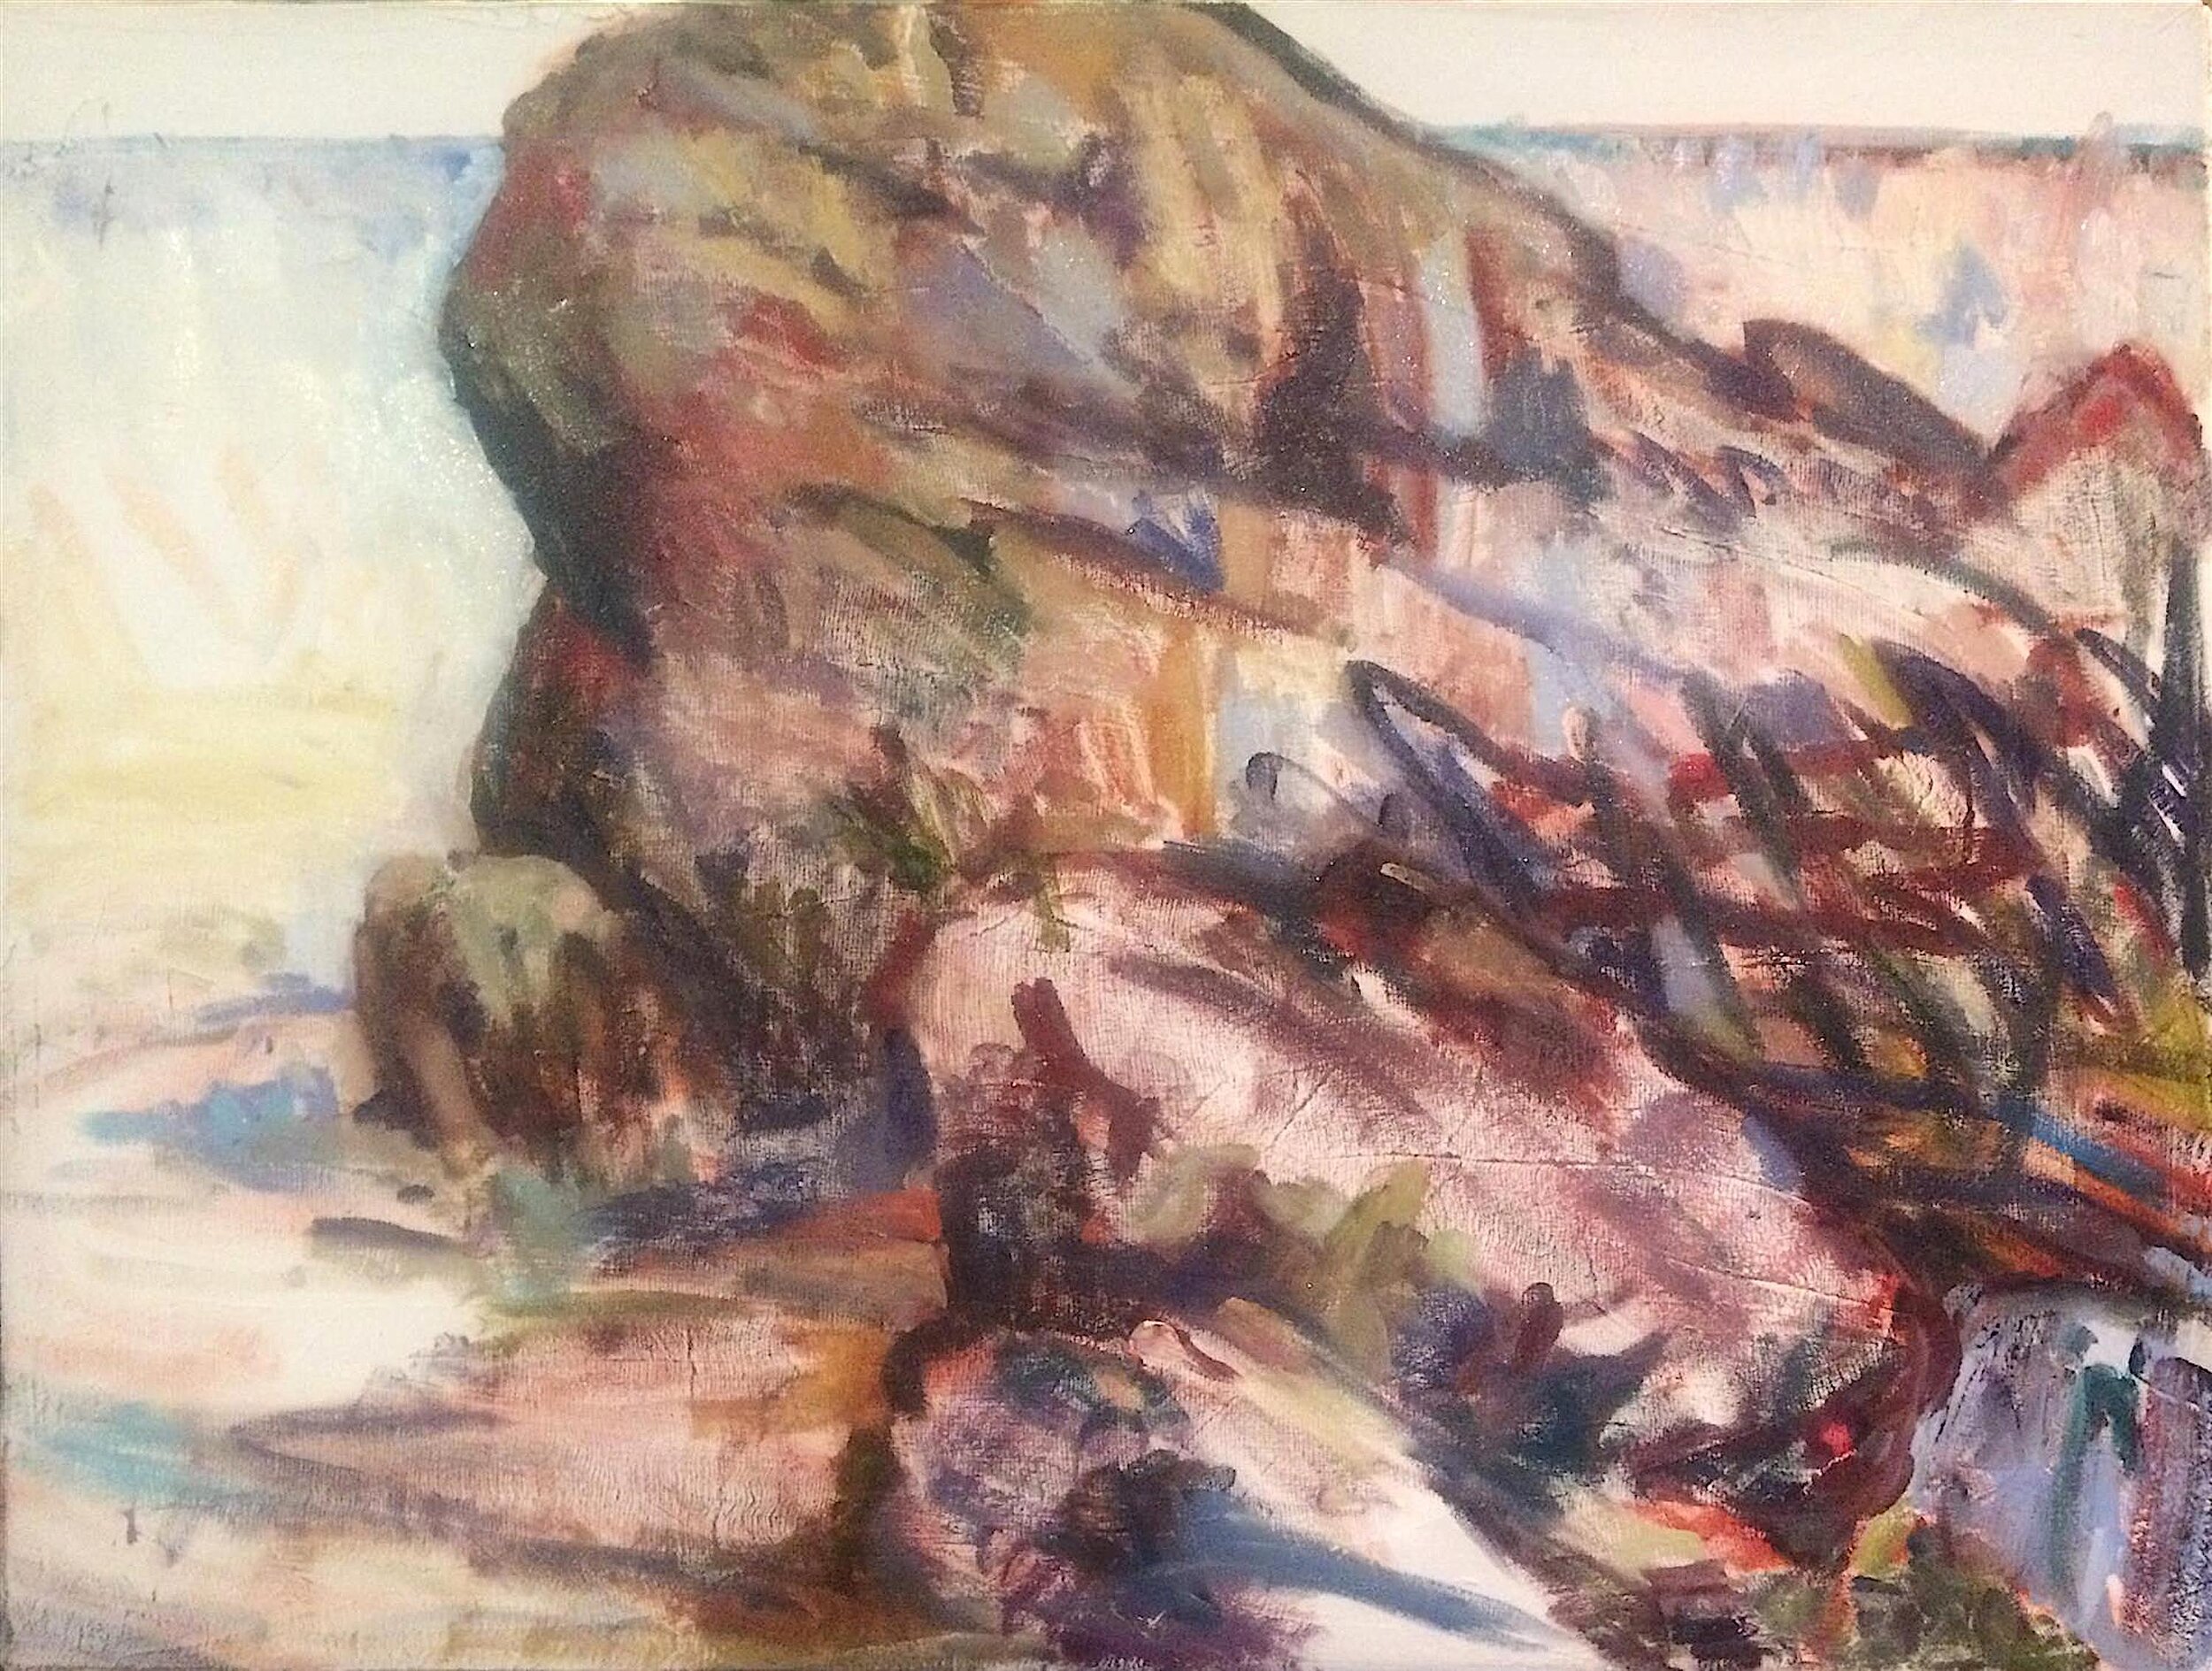  Heidi Caswell Zander,  Upon this Rock , Oil paint, 36x48 